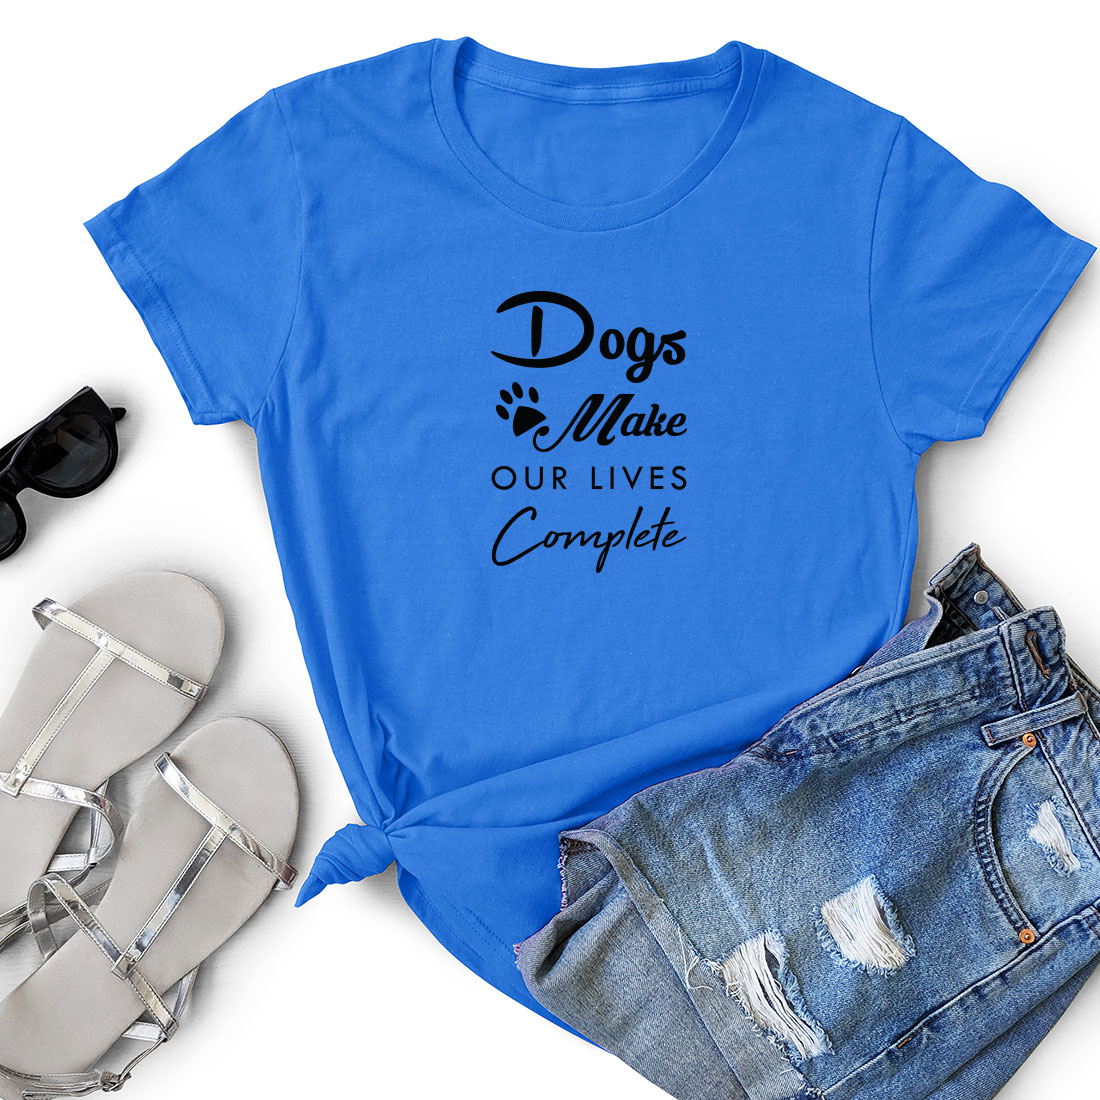 T - shirt that says dogs make our lives complete.